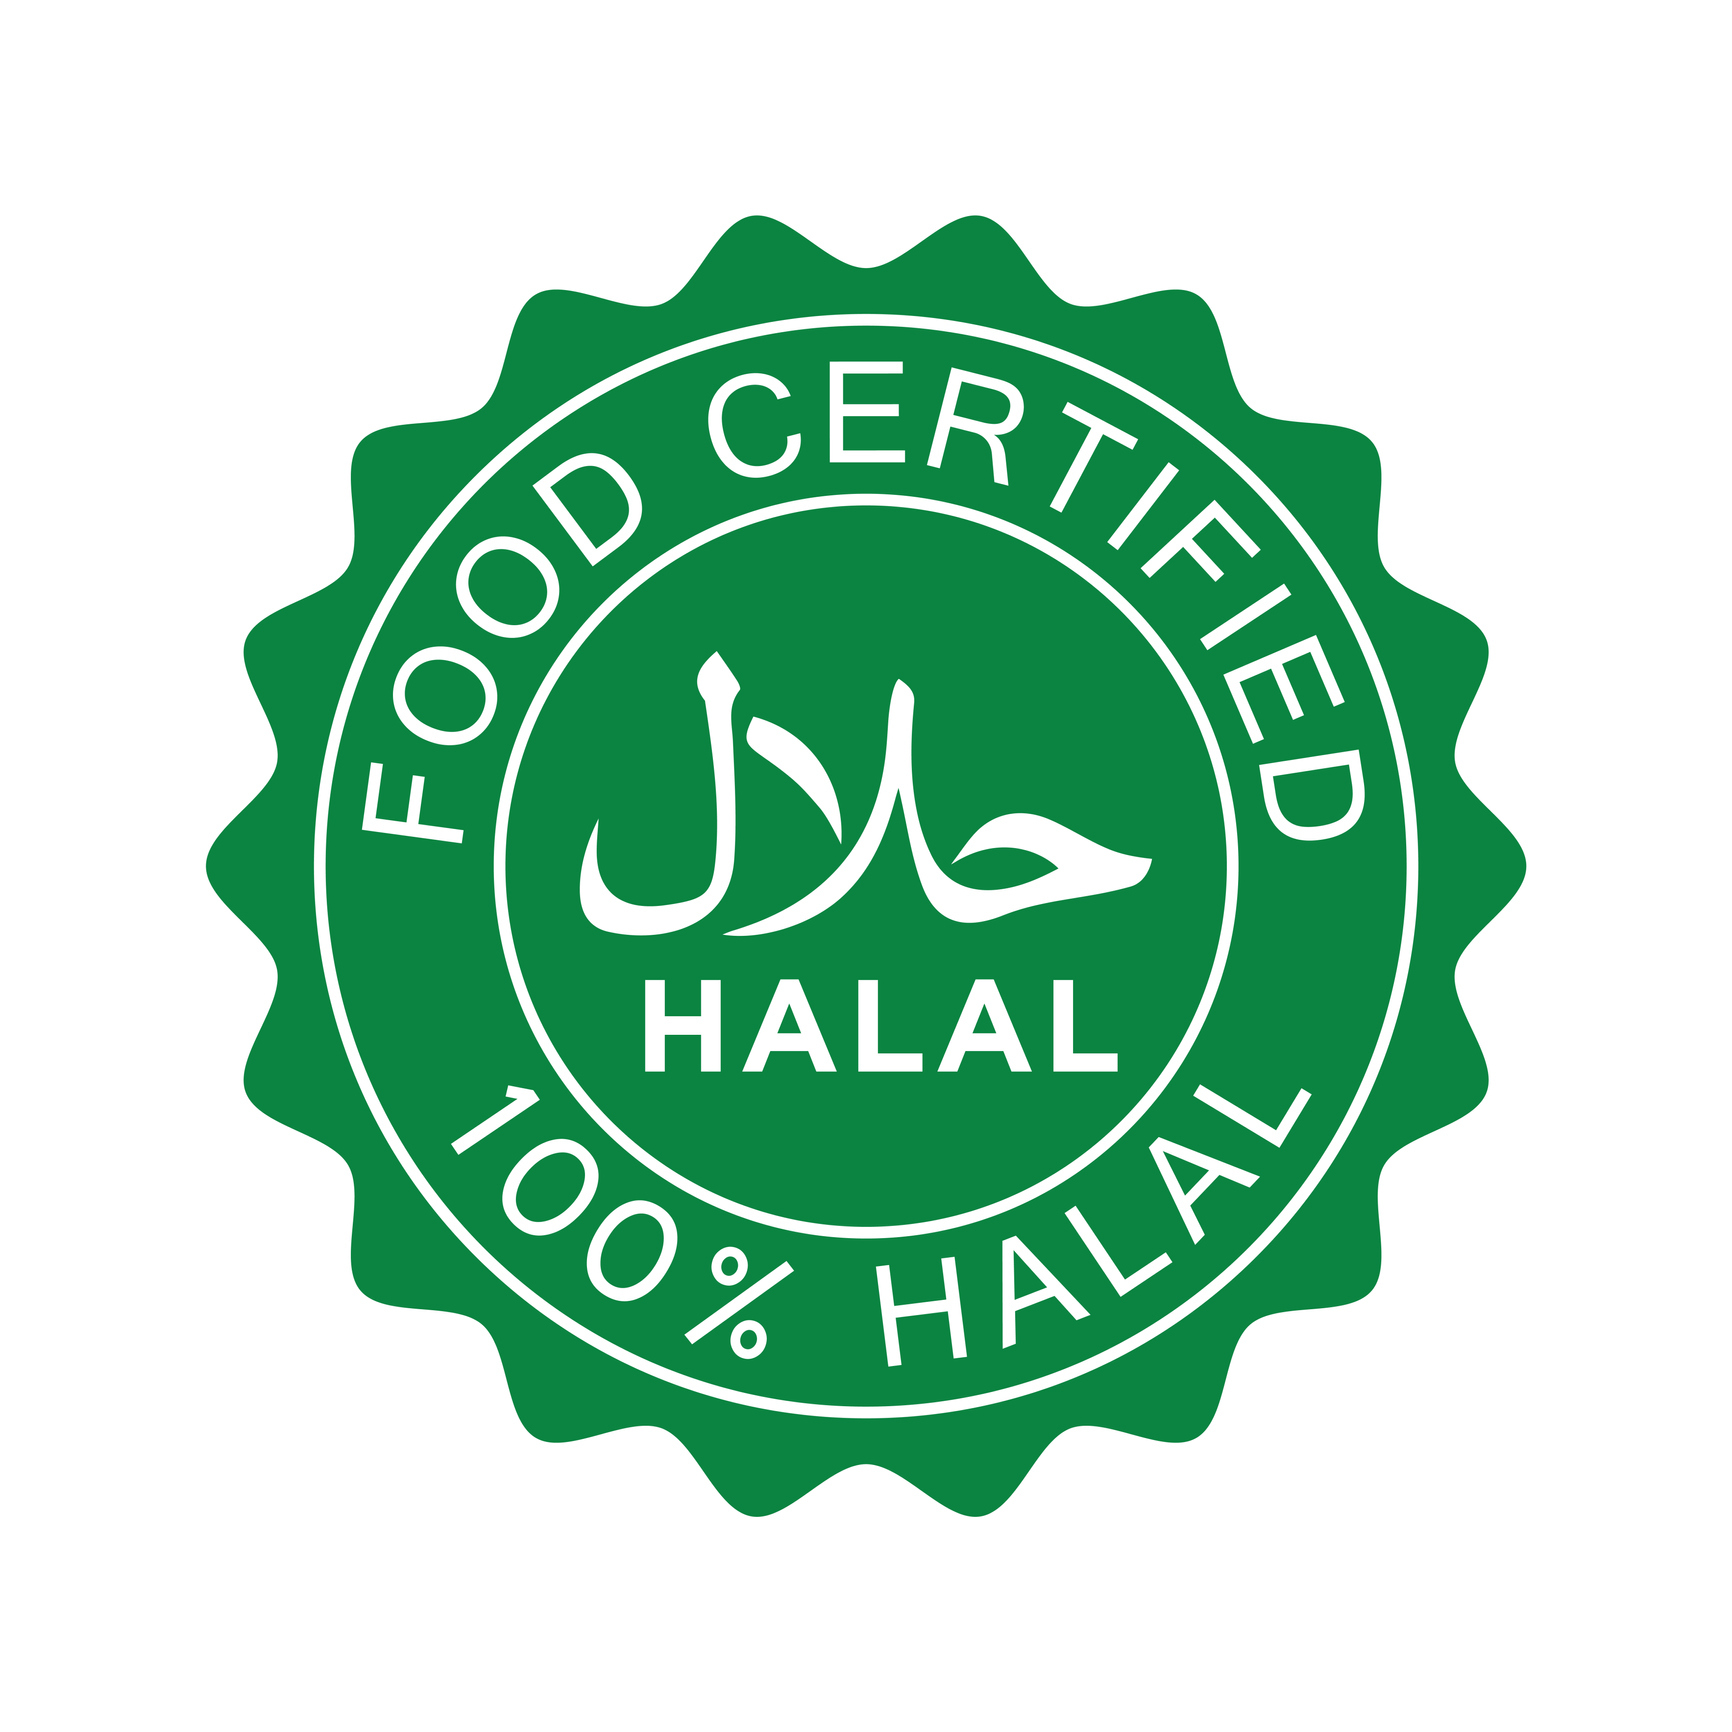 What Is Halal Food? Meaning, Types And Halal Meat Certification